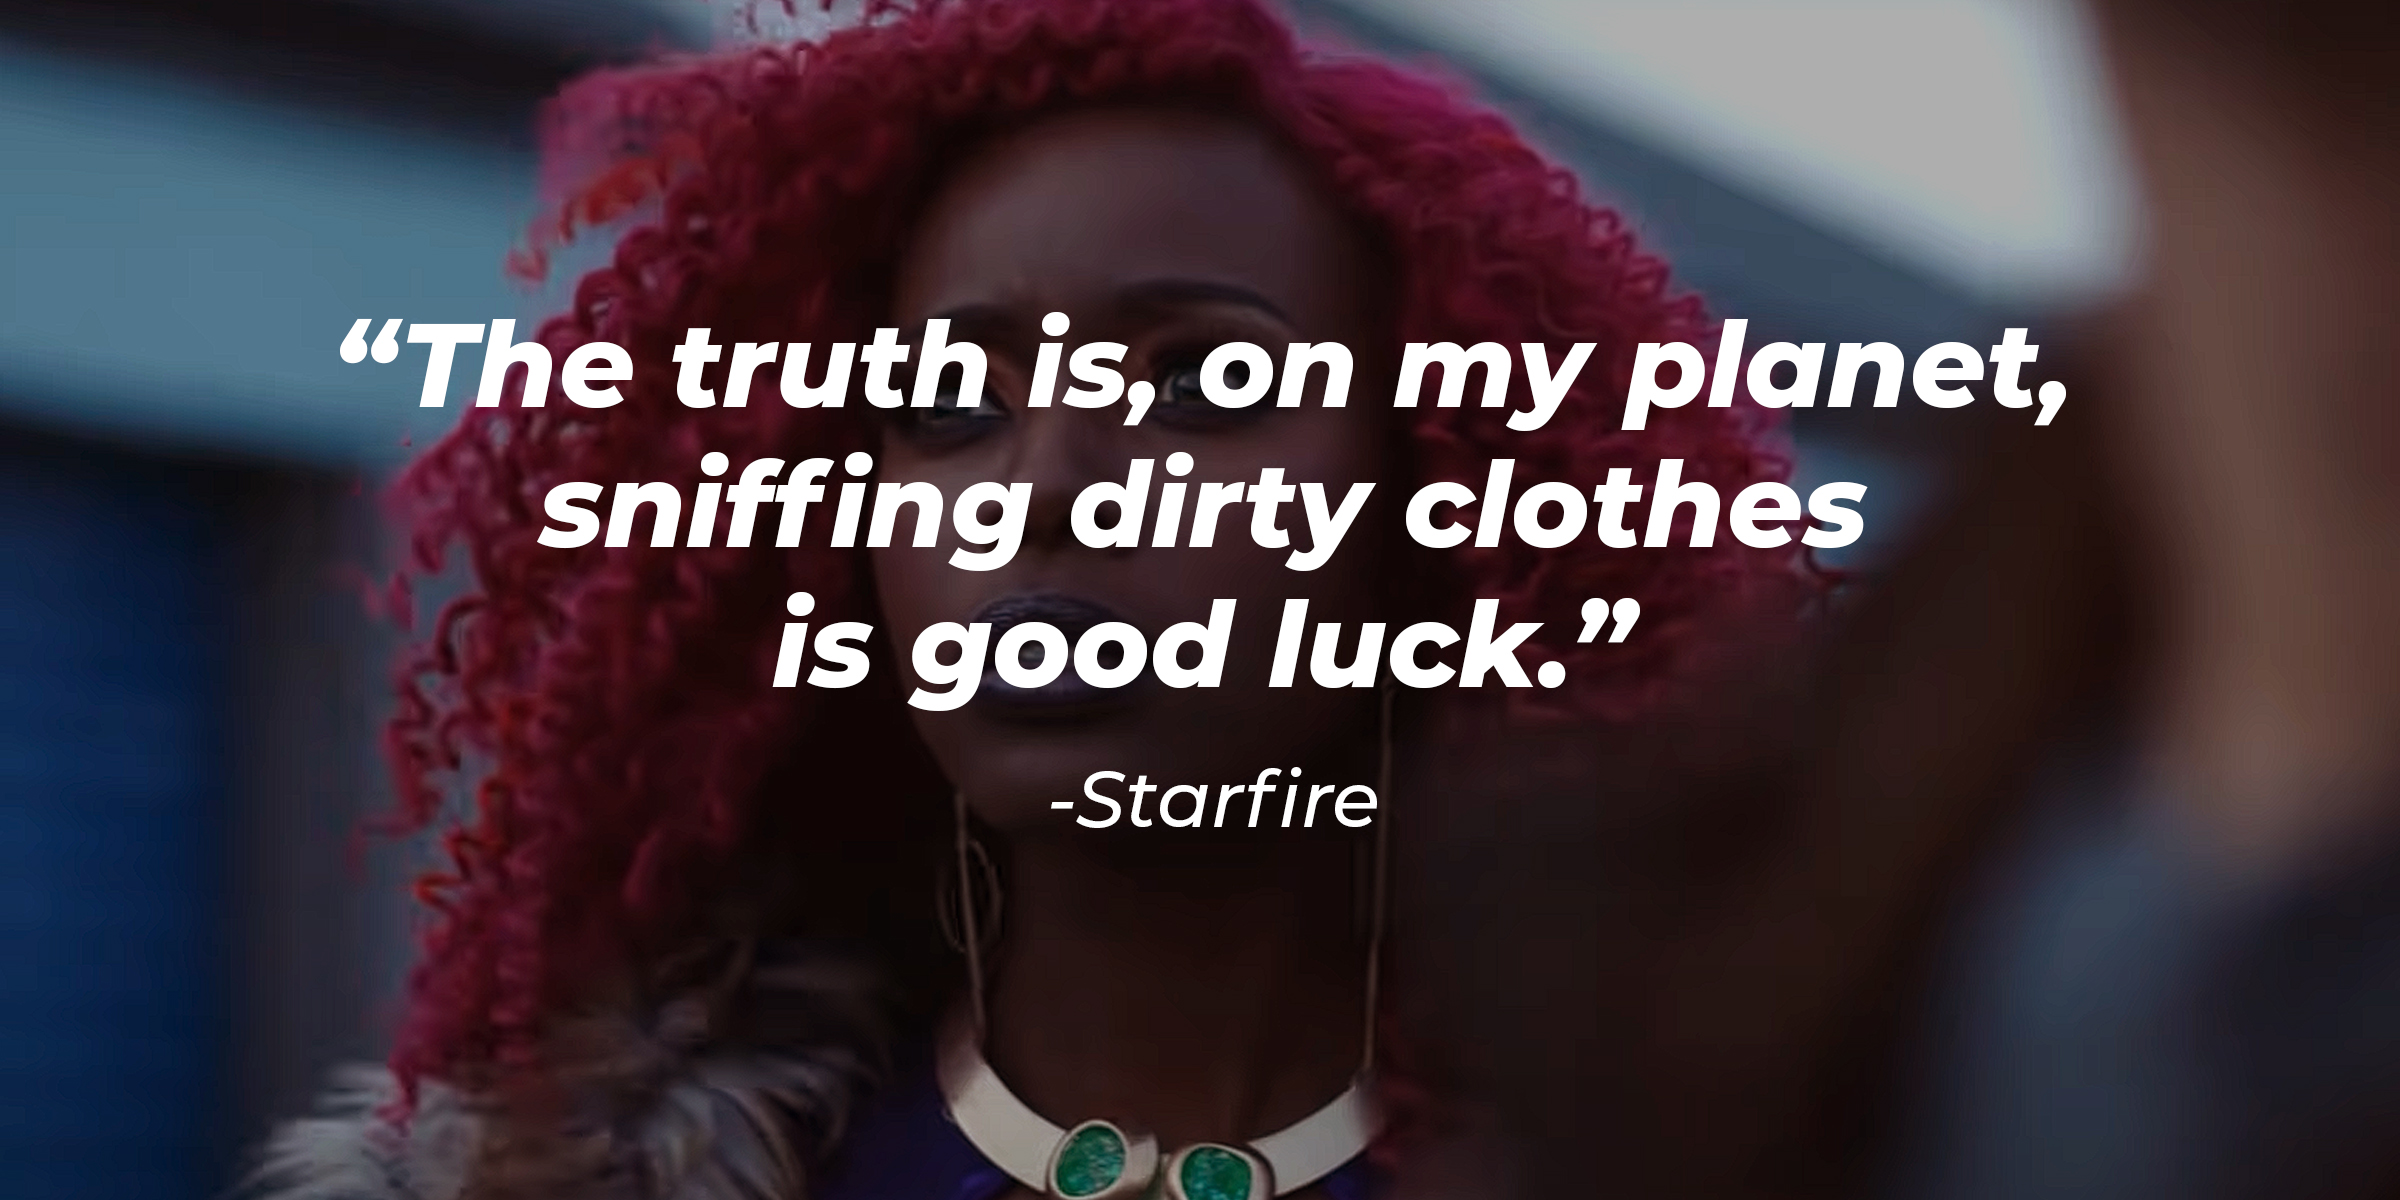 An image of Starfire’s from the live action “Titans” with a quote by the character: "The truth is, on my planet, sniffing dirty clothes is good luck." | Source: youtube.com/stillwatchingnetflix